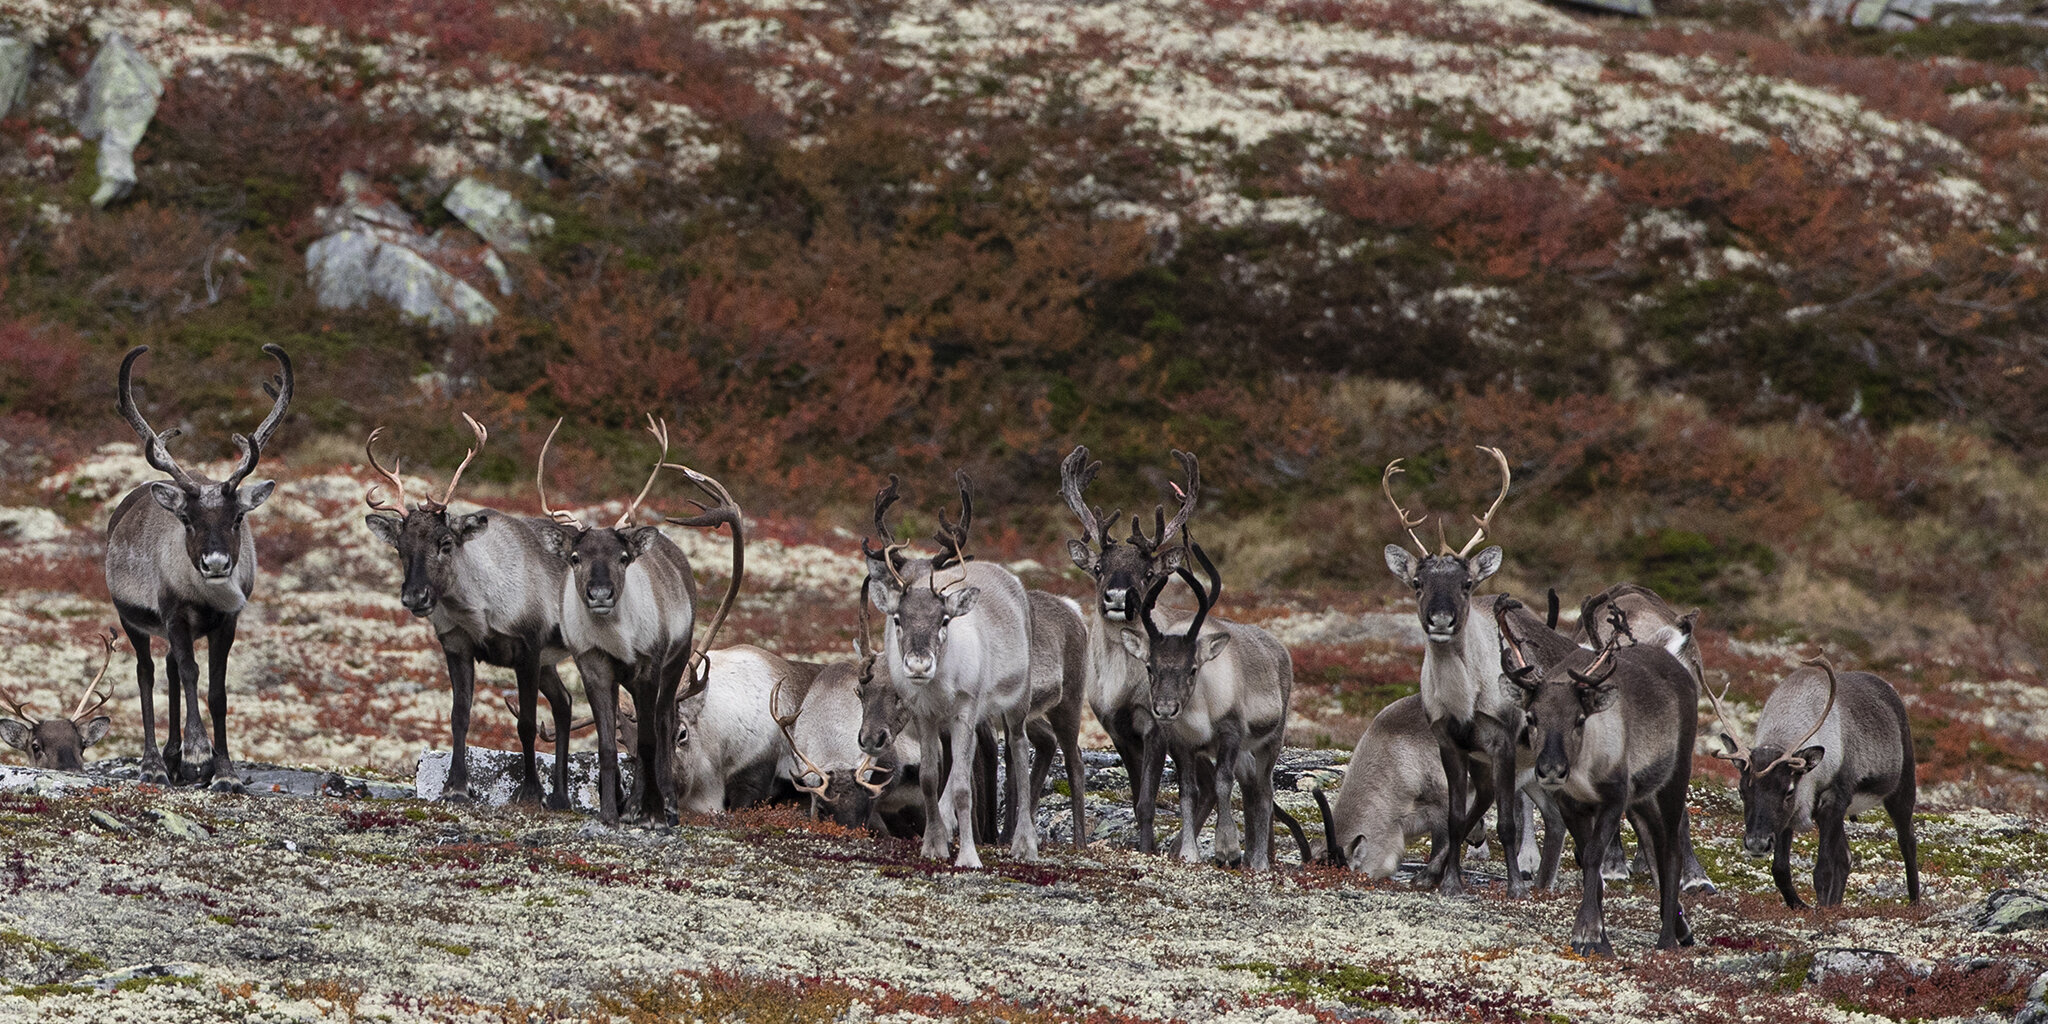  The wild reindeer are often referred to as the mountain's nomad. This is an indication of the wild reindeer's way of using the habitats.They live in the most extreme areas found in Norway. 